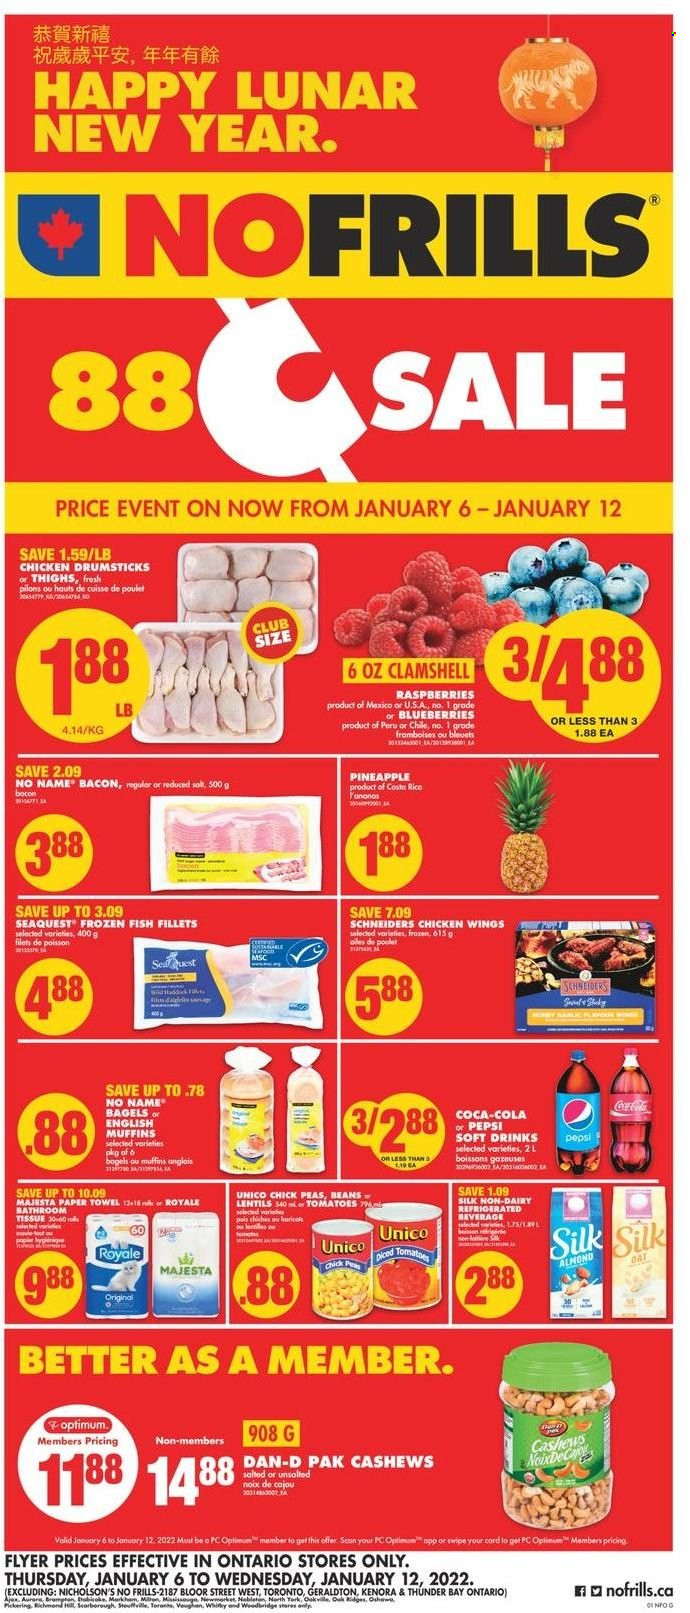 thumbnail - No Frills Flyer - January 06, 2022 - January 12, 2022 - Sales products - bagels, english muffins, beans, tomatoes, blueberries, pineapple, fish fillets, fish, No Name, bacon, Silk, chicken wings, lentils, Dan-D Pak, rice, cashews, Coca-Cola, Pepsi, soft drink, chicken drumsticks, chicken, bath tissue, paper towels, Optimum. Page 1.